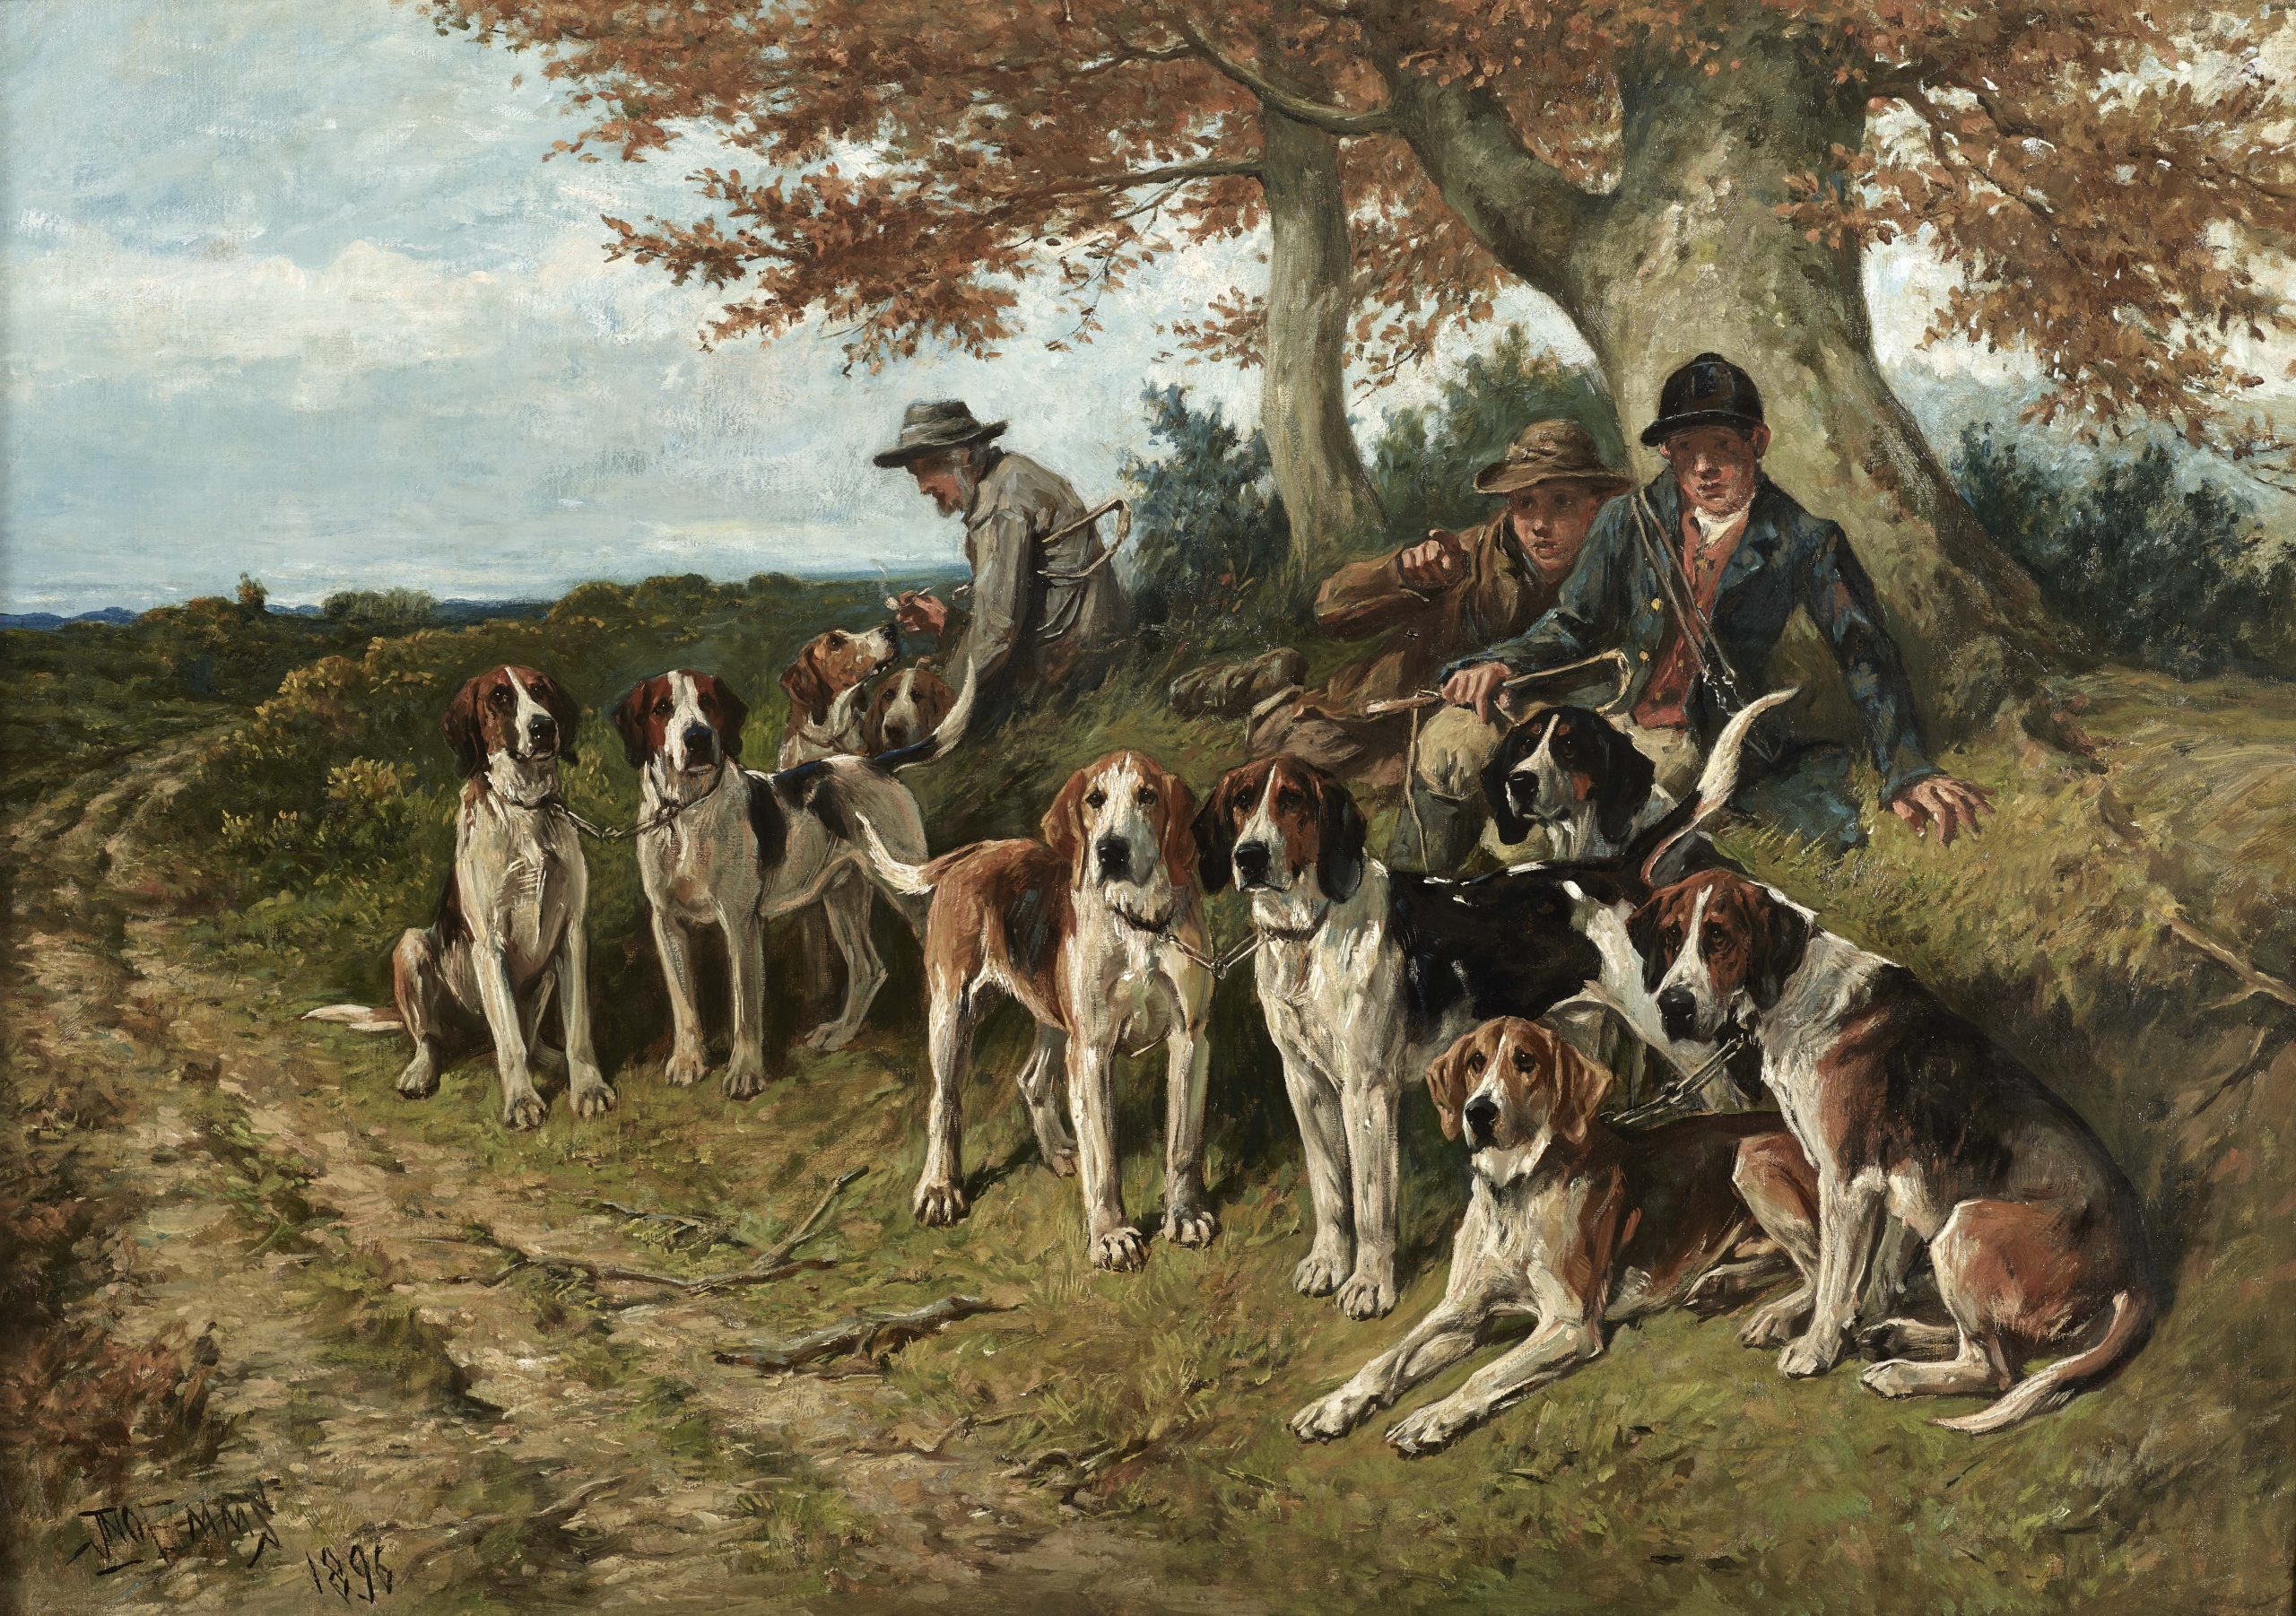 John-Emms-British-1843-1912-The-New-Forest-Buckhounds.-Estimate_-50000-70000-21ivyd6oy-scaled